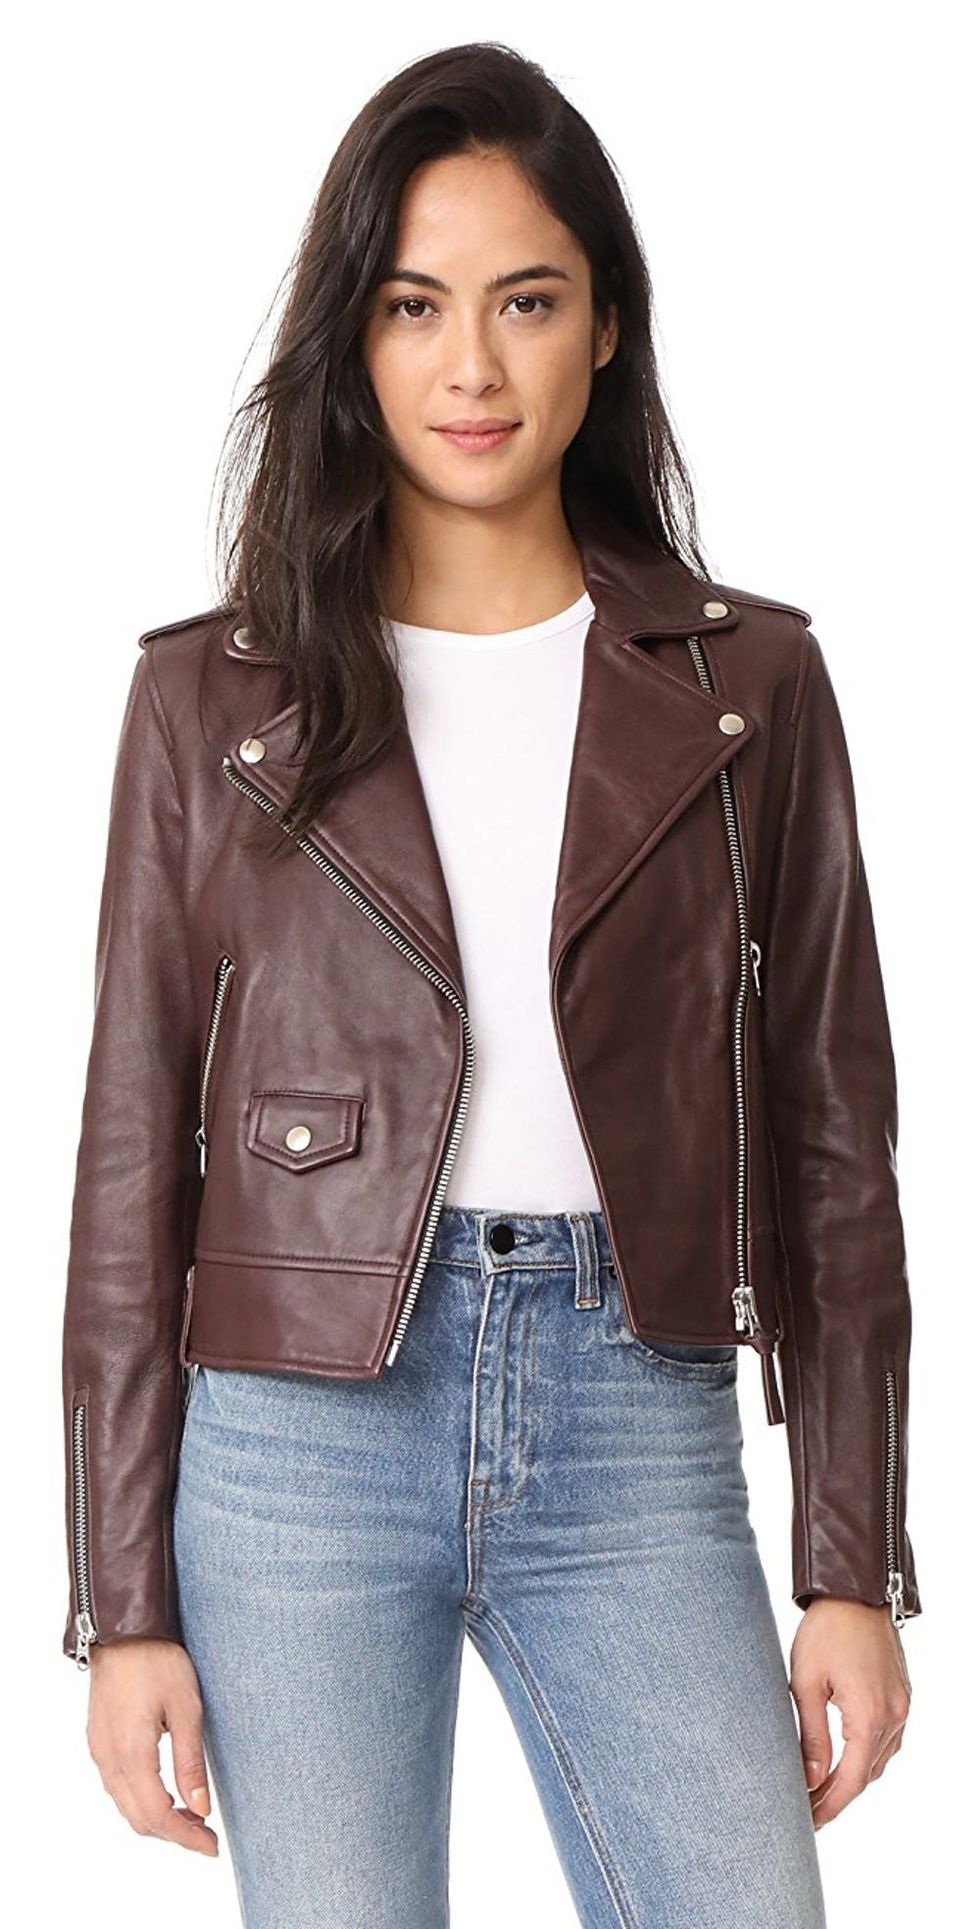 All the Details on Meghan Markle’s Wine-Colored Leather Jacket - Brit + Co